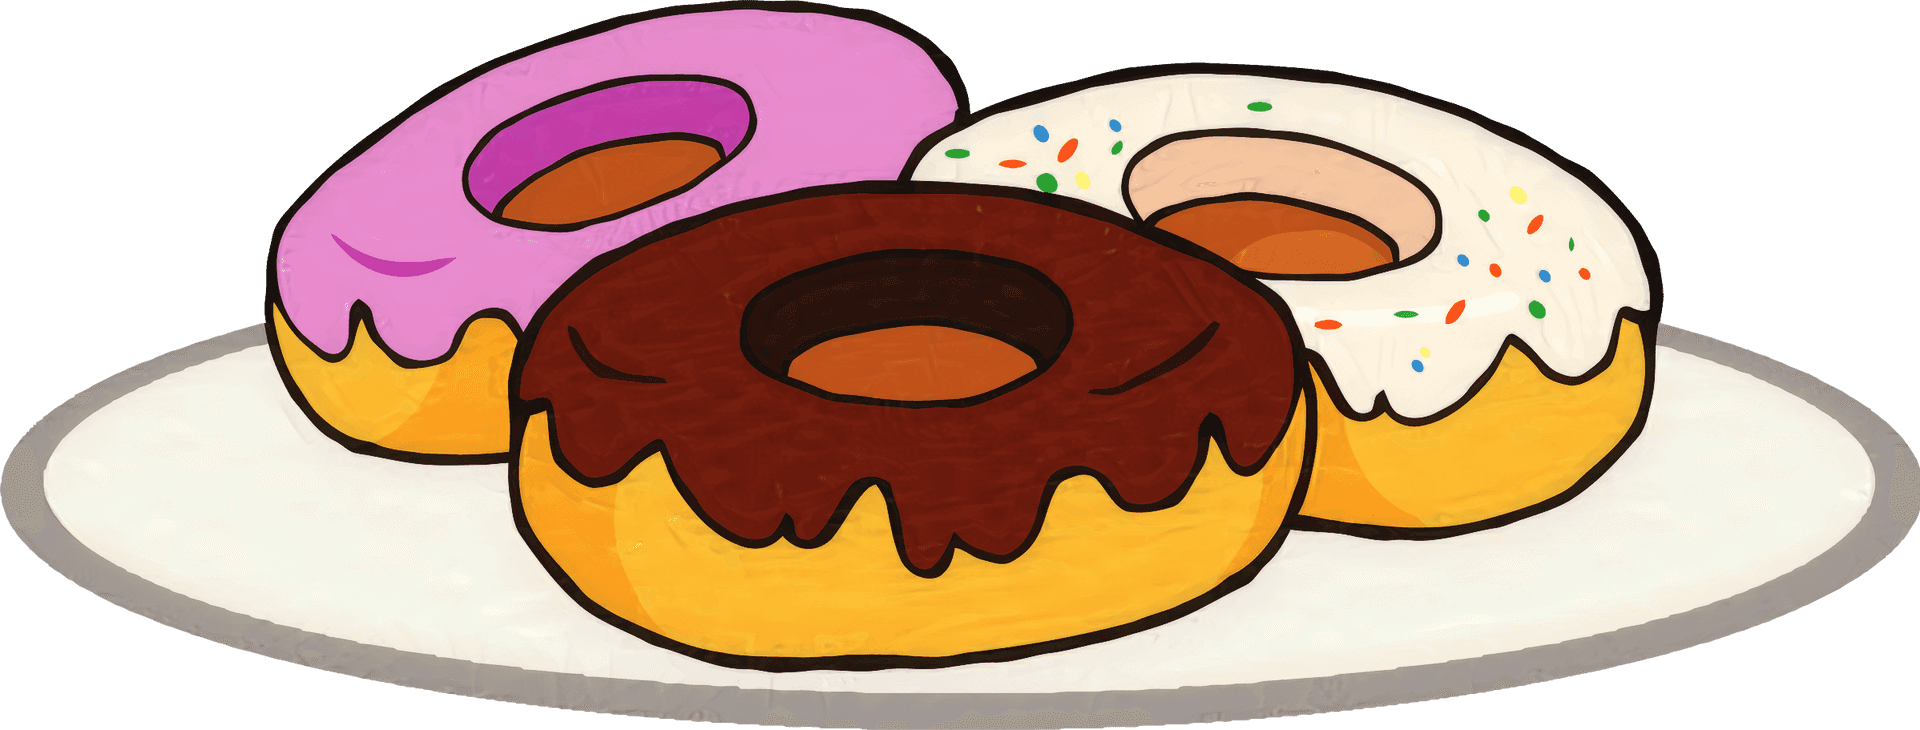 Assorted Cartoon Donutson Plate PNG